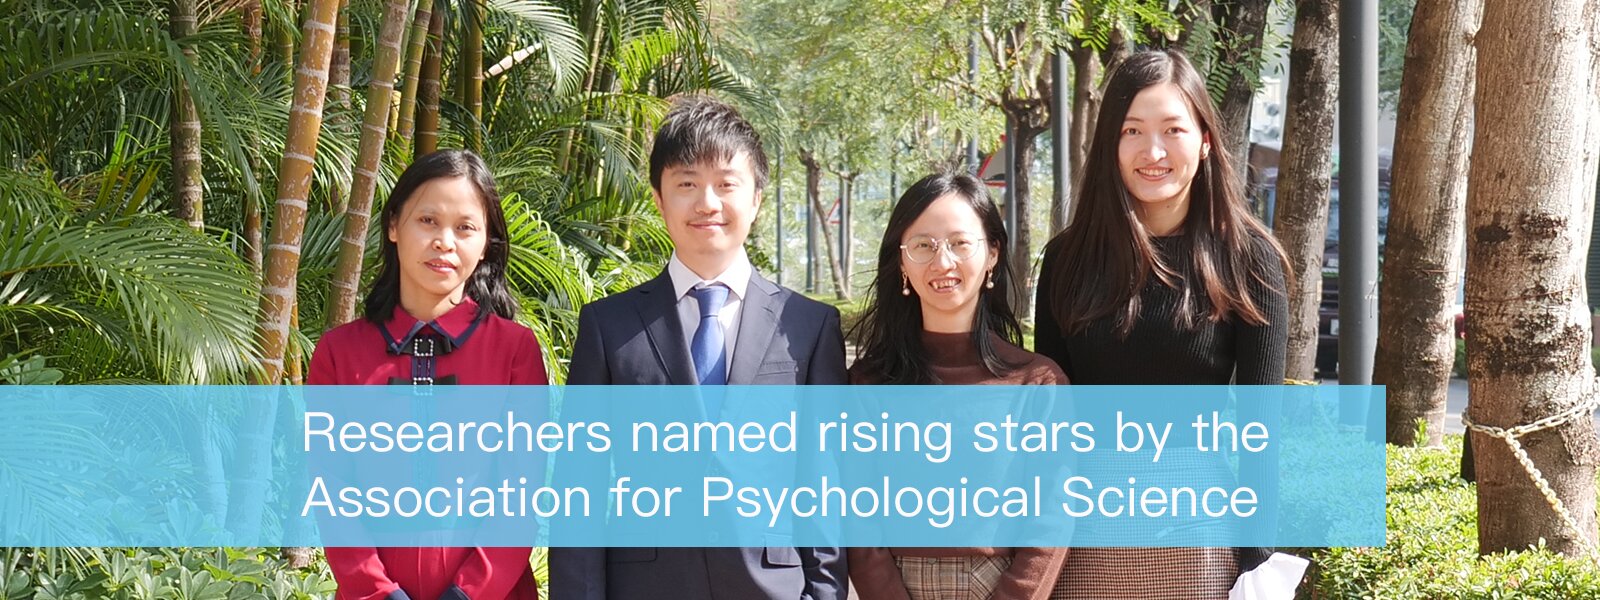 Researchers Named Rising Stars by the Association for Psychological Science